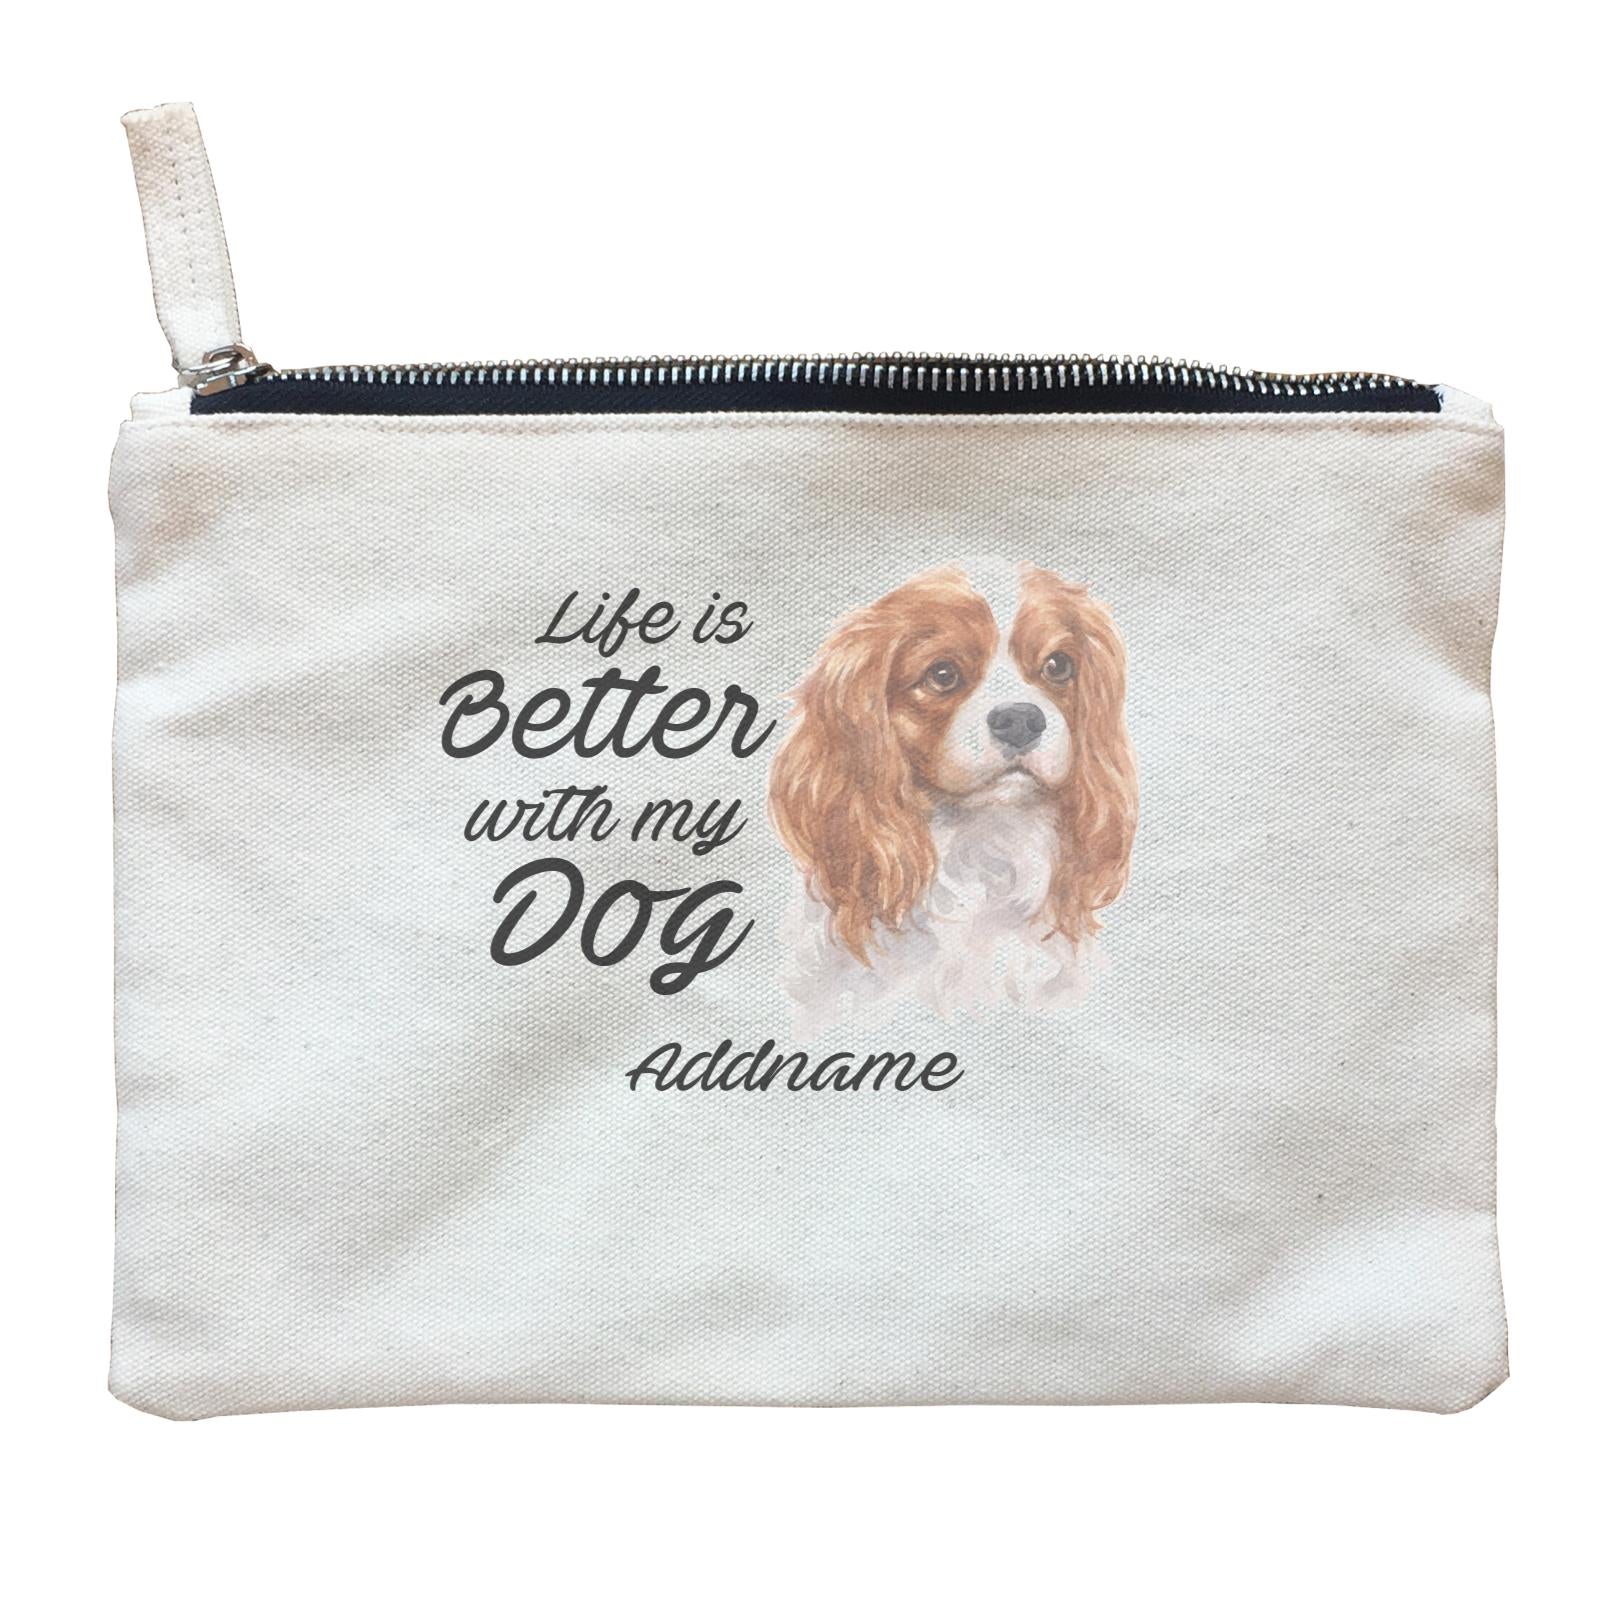 Watercolor Life is Better With My Dog King Charles Spaniel Addname Zipper Pouch